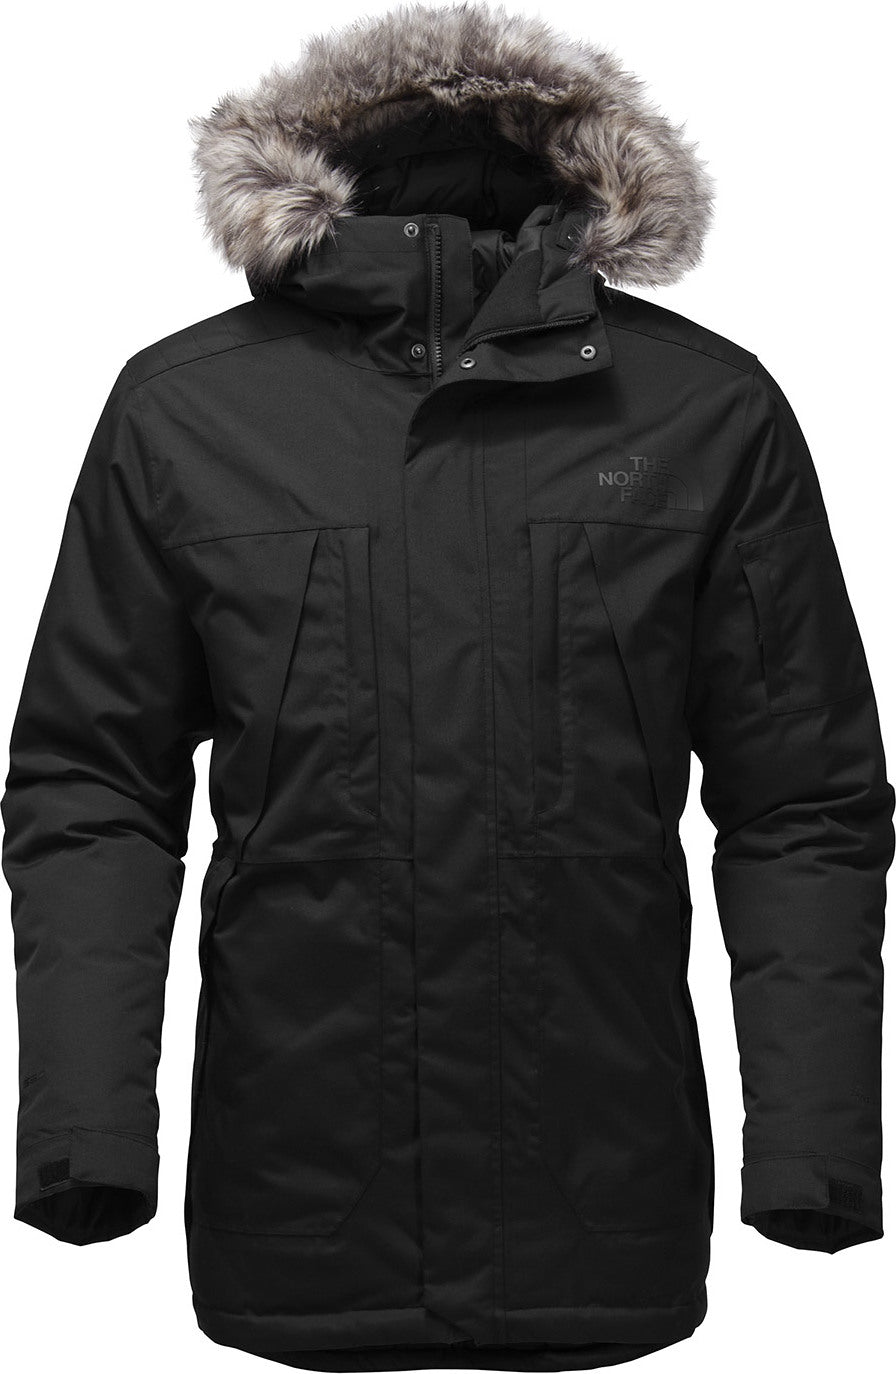 The North Face Outer Boroughs Parka - Men's | Altitude Sports